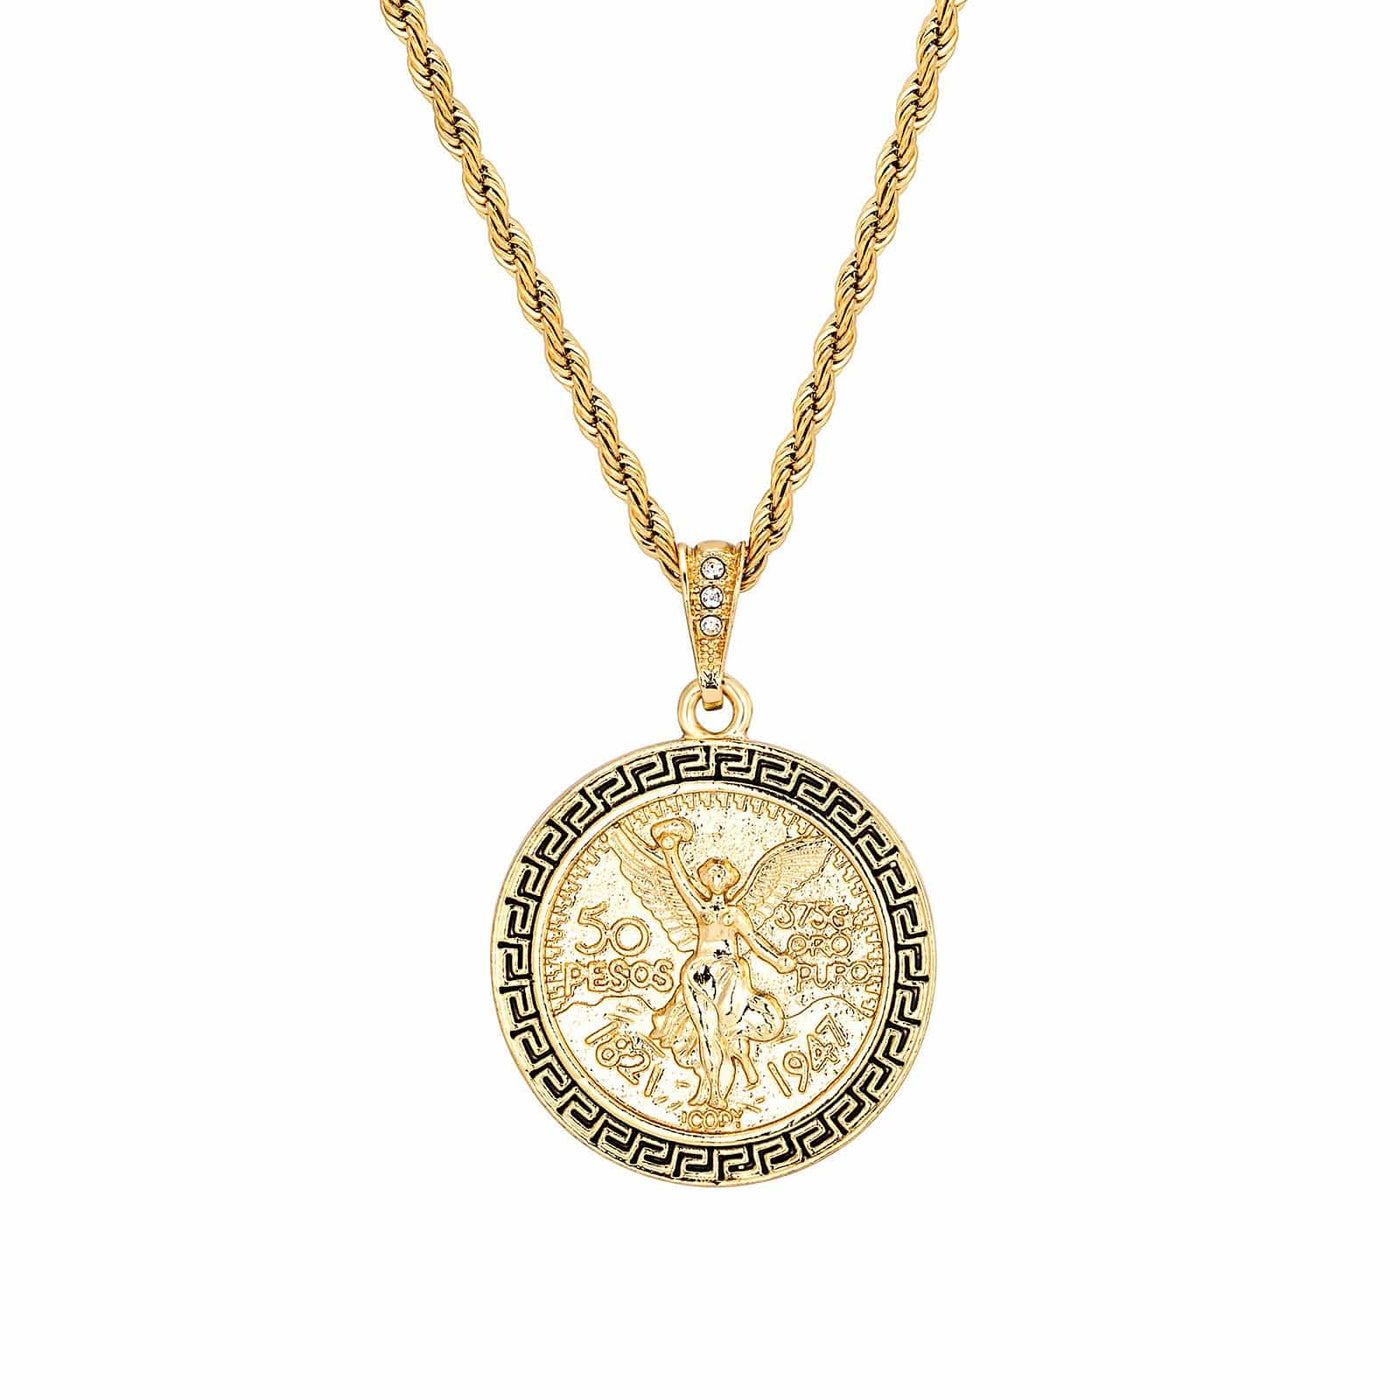 Centenario Mexican Coin Necklace 14K Gold Plated - Luxe & Co. Jewelry